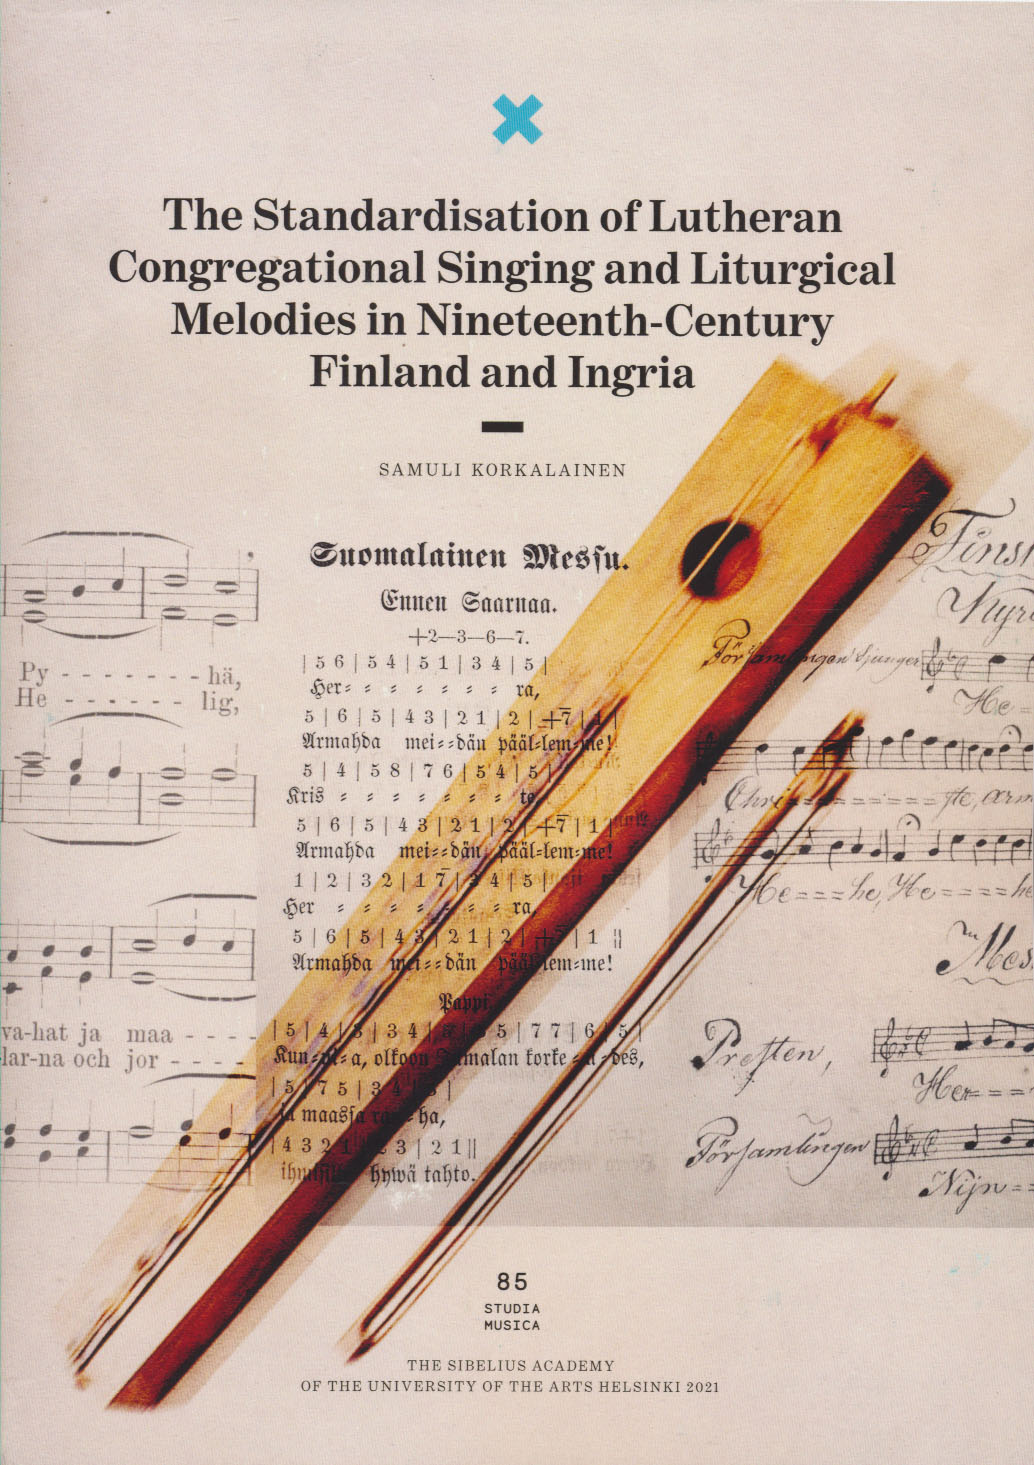 The Standardisation of Lutheran Congregational Singing and Liturgical Melodies in Nineteenth-Century Finland and Ingria